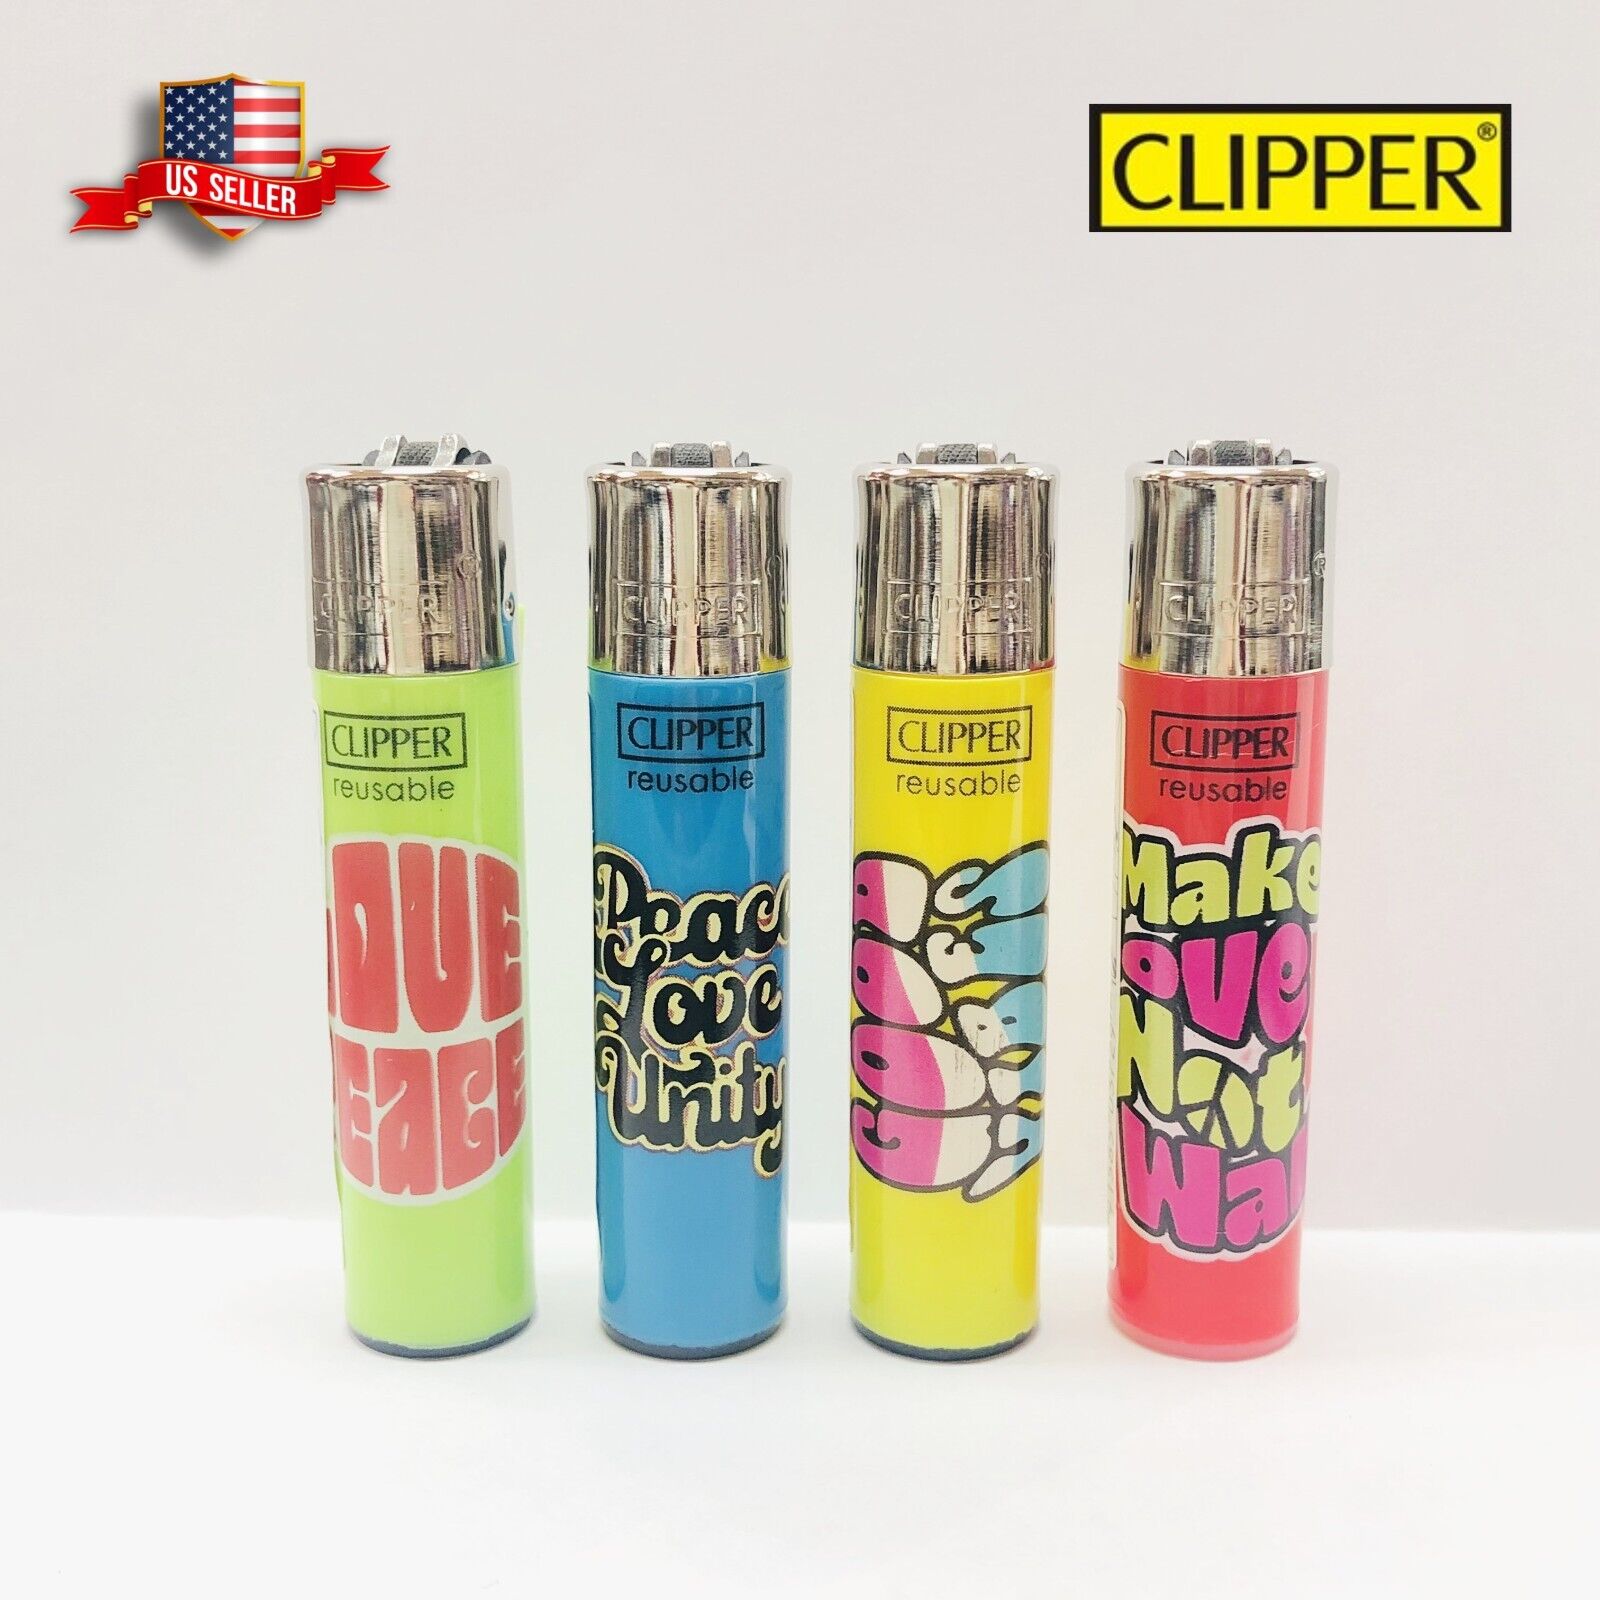 Clipper Classic Large Reusable Lighters Taroting Collection 1 (Set of 4)